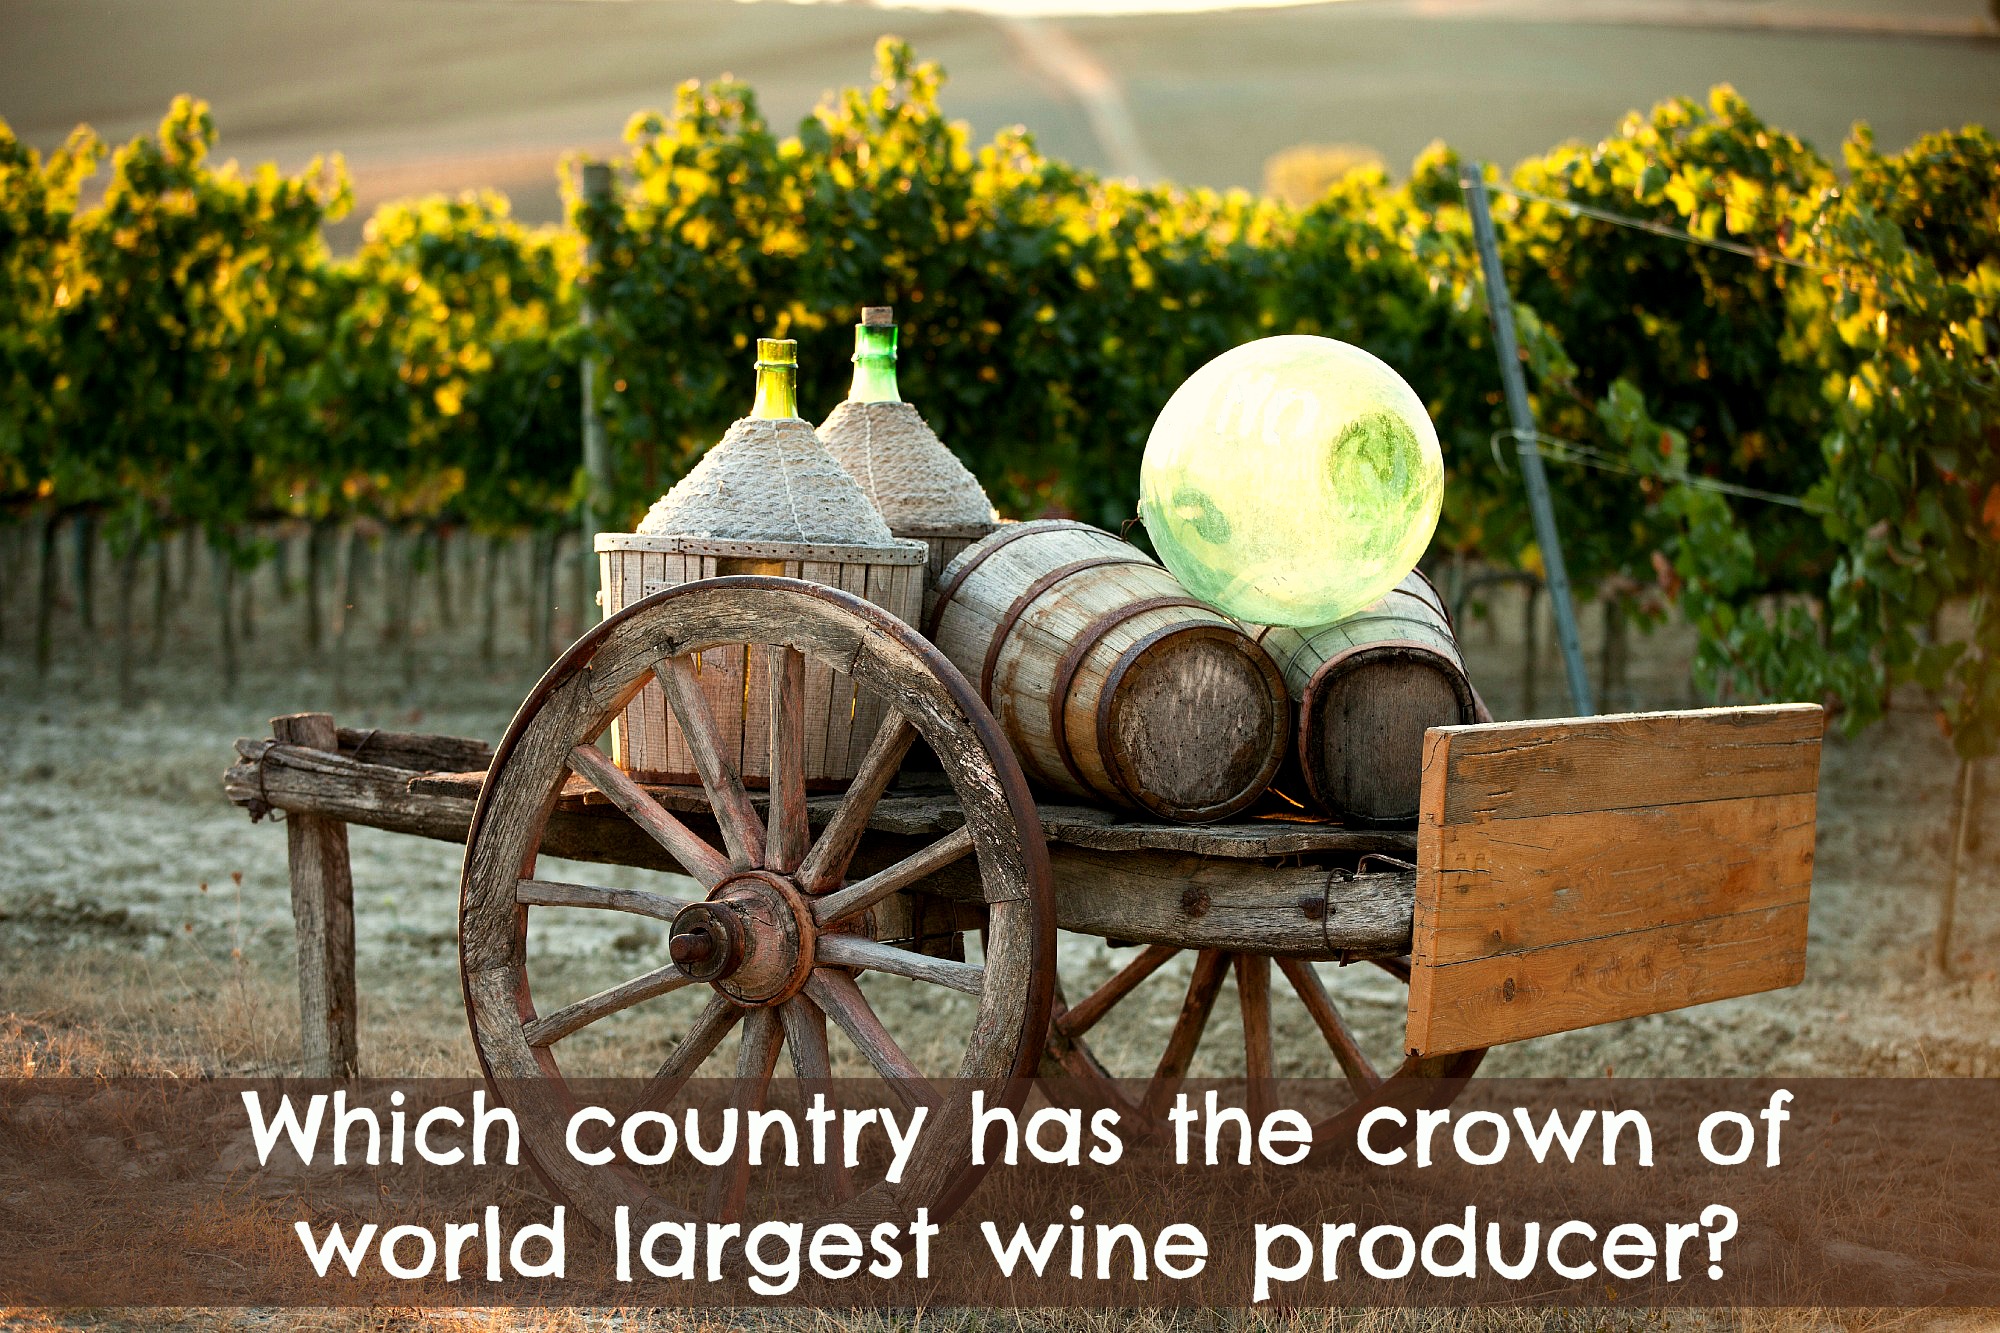 Which country has the crown of world largest wine producer?